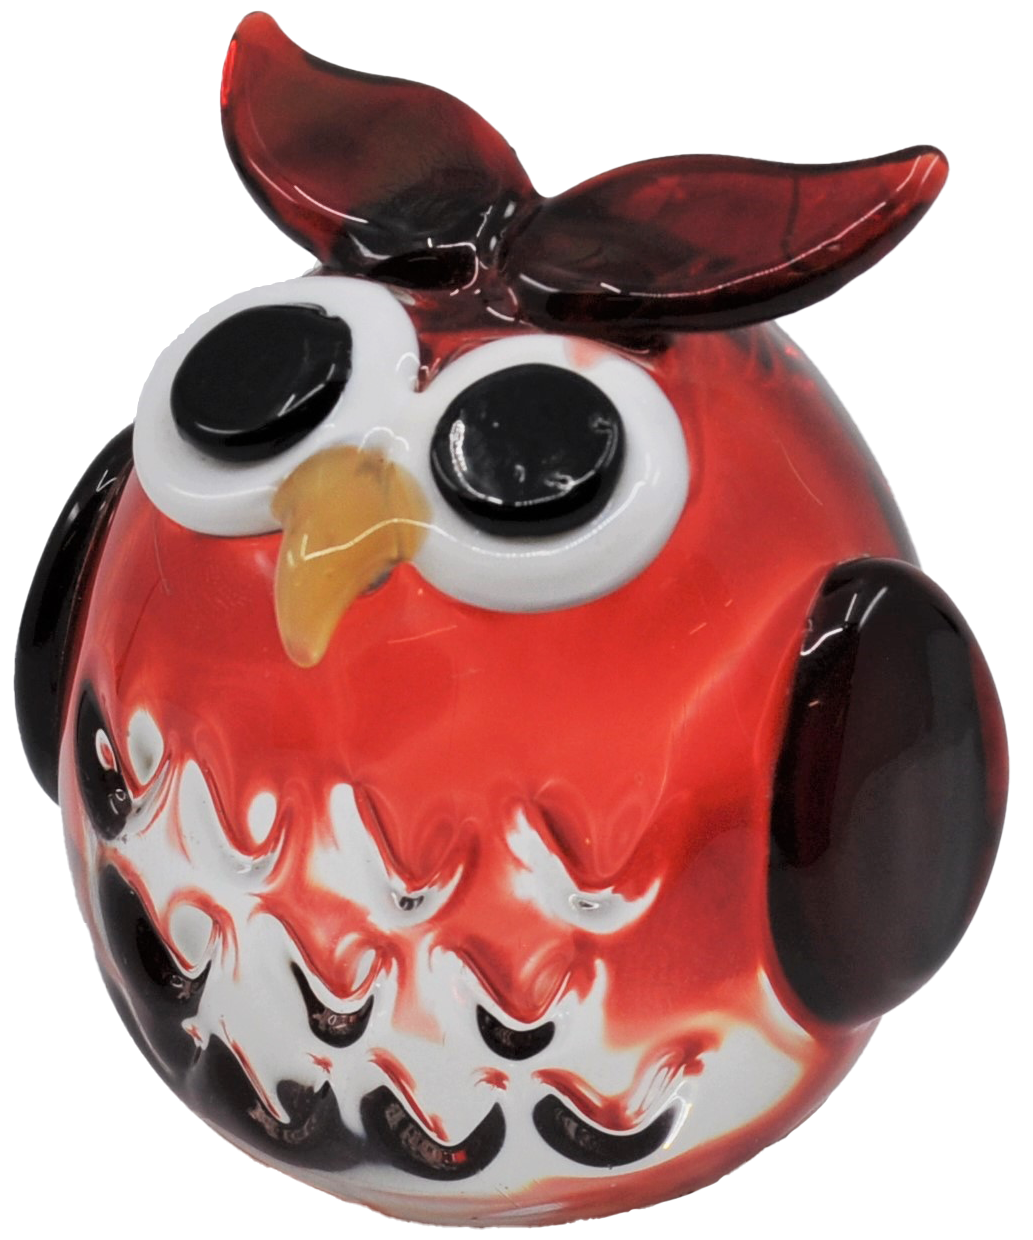 Crystal Castle Blown Glass Owl Figurine in Red with Big expressive eyes and yellow details.